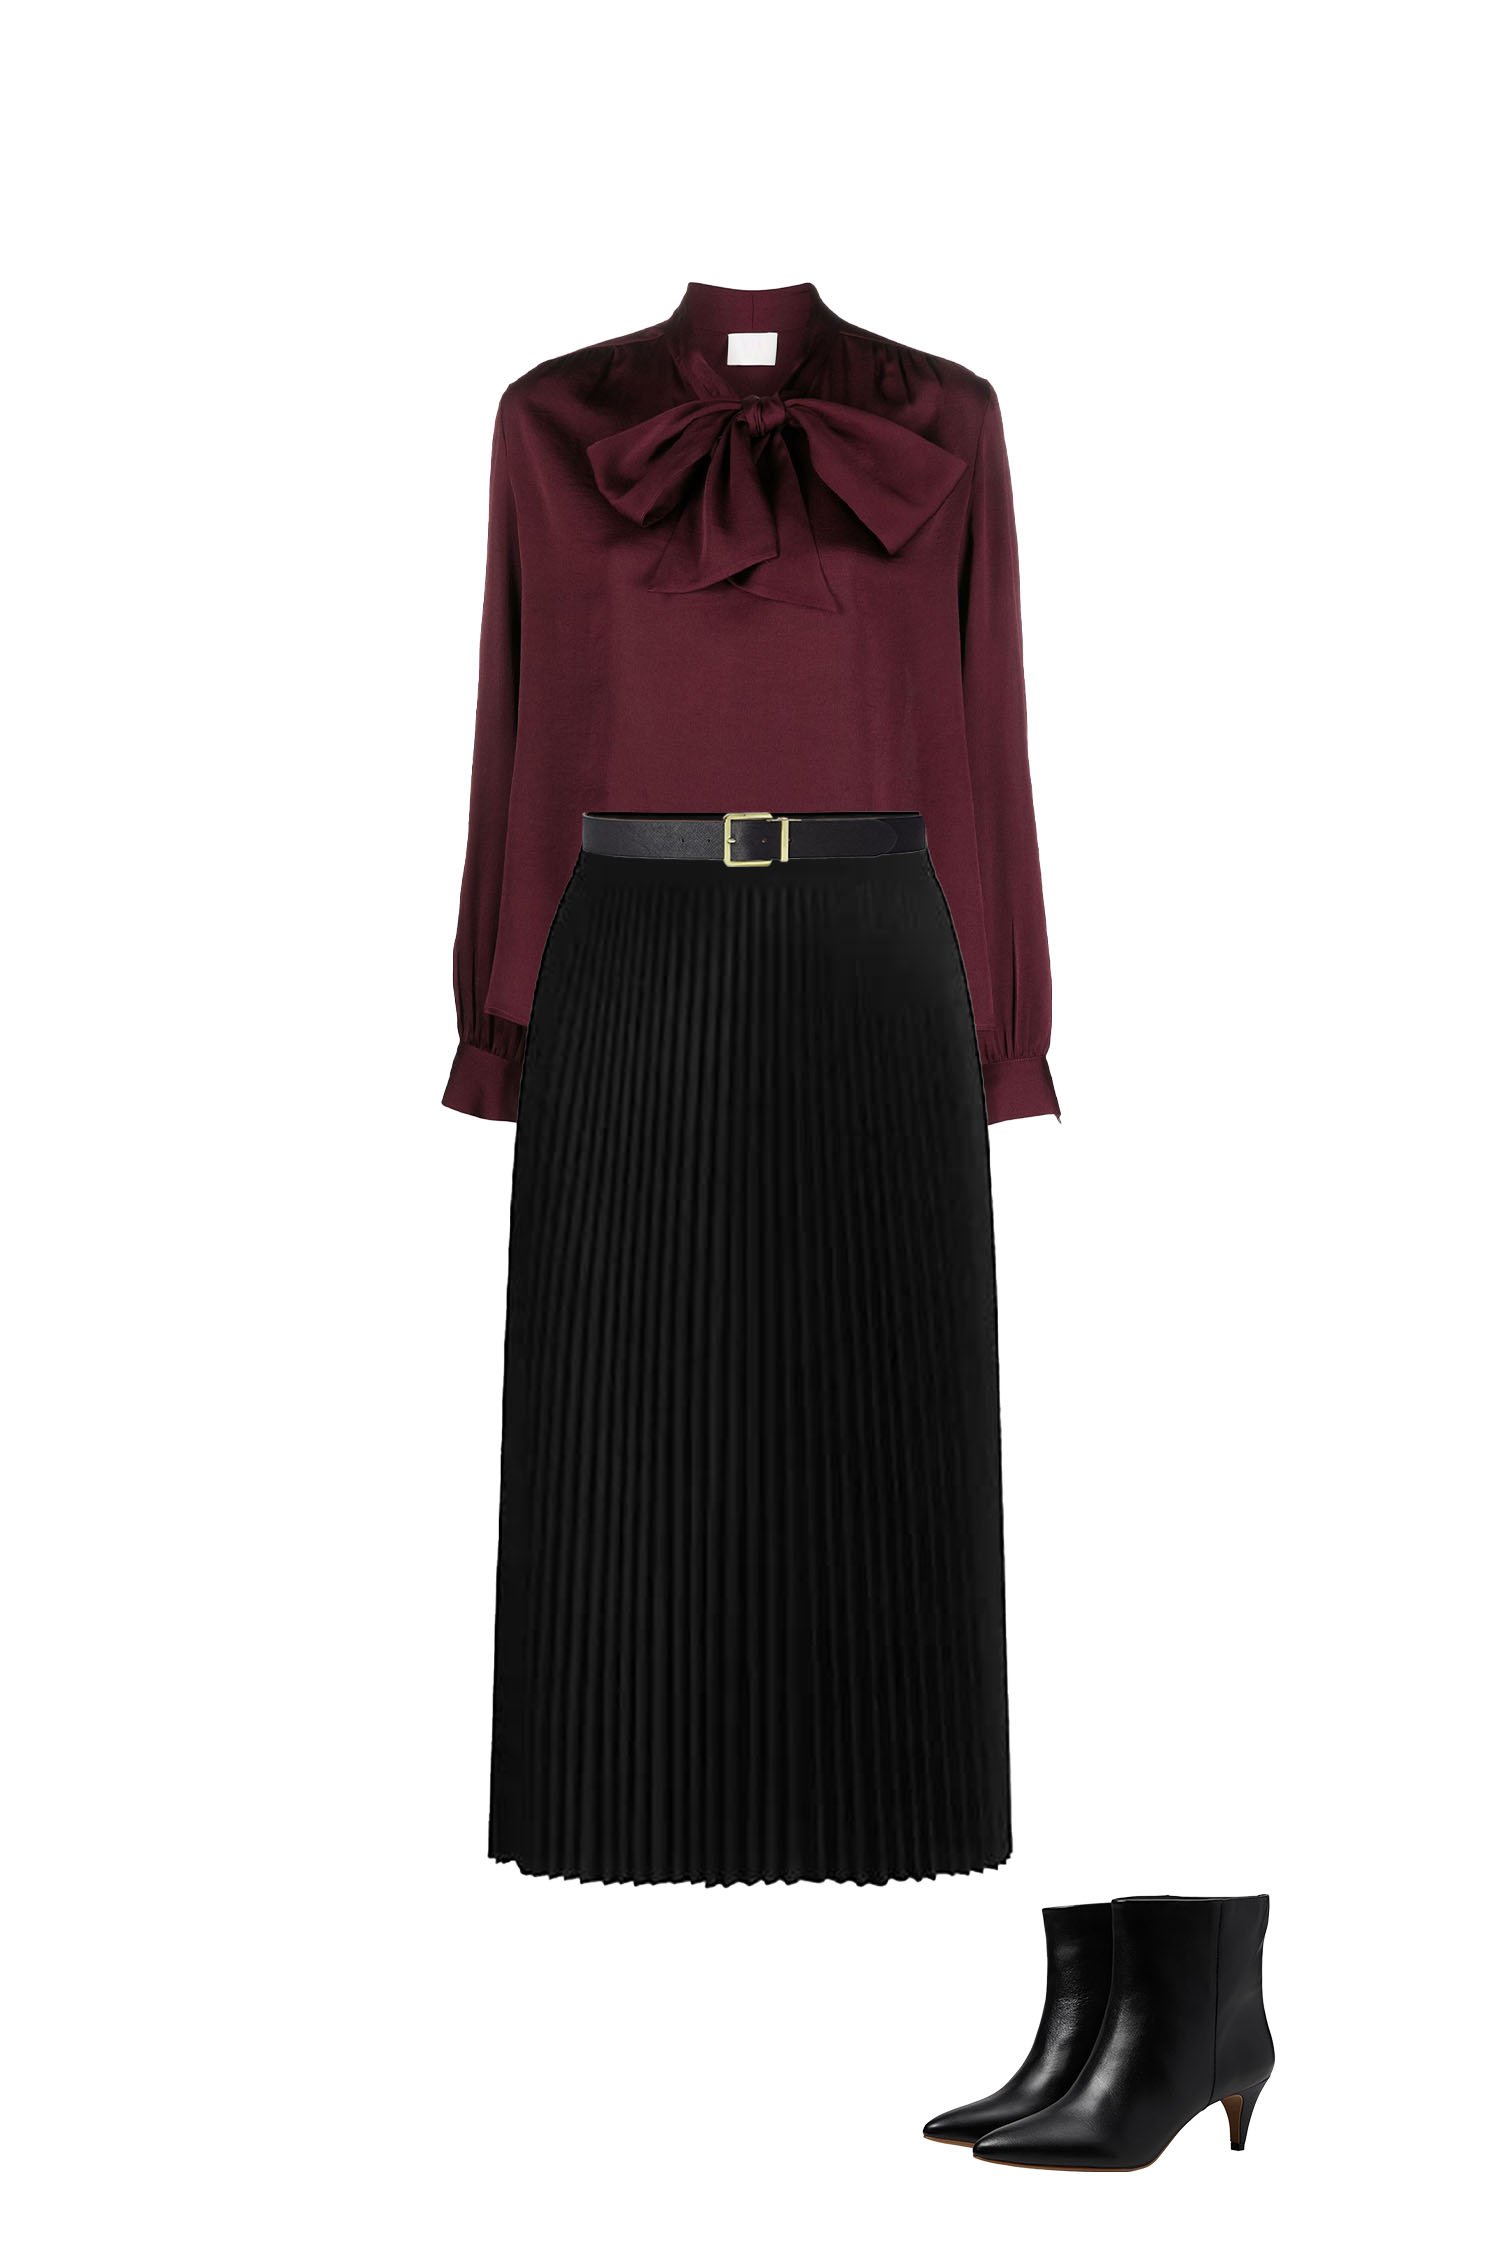 Business Casual Midi-Skirt Outfit - Black Pleated Skirt, Berry Silk Pussy-Bow Blouse, Black Ankle Boots